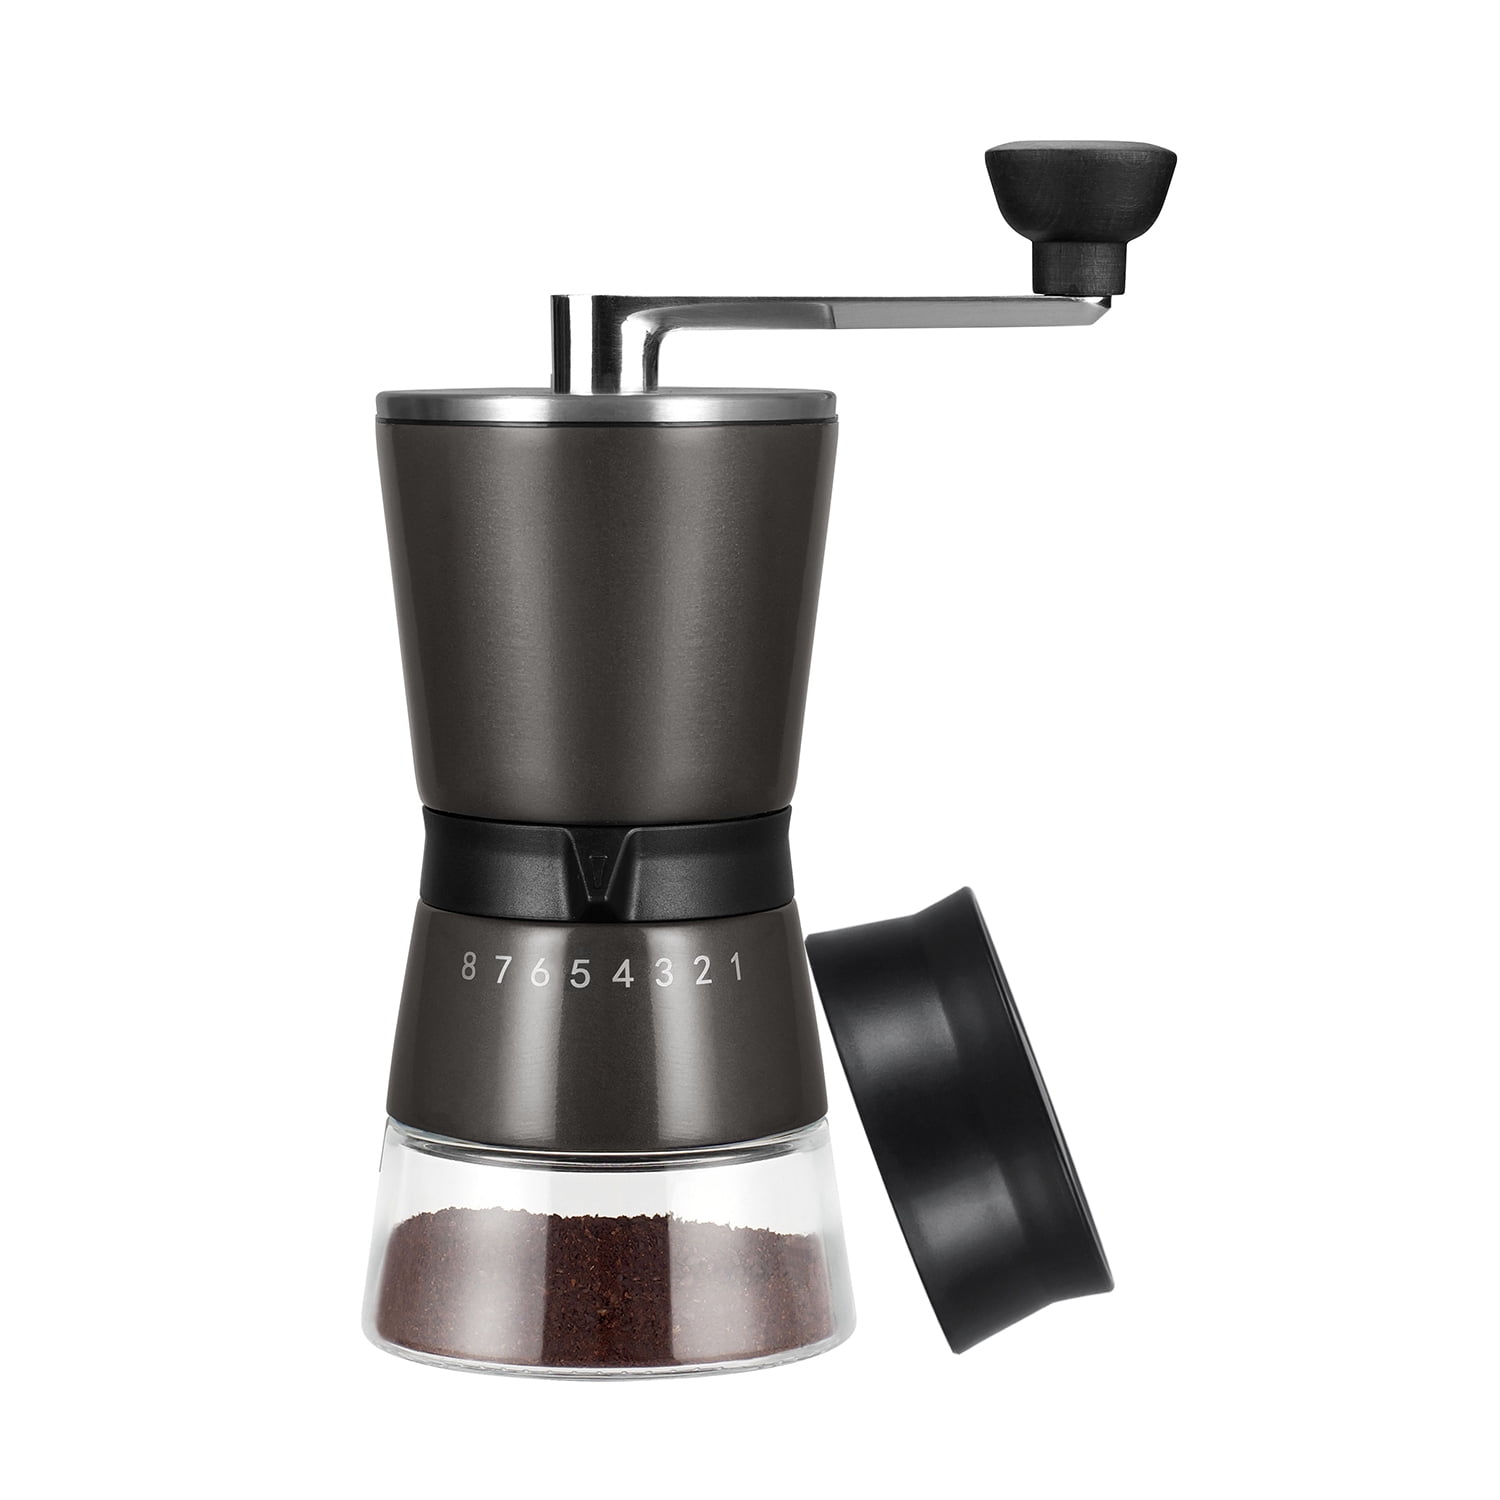 Vucchini Manual Coffee Grinder with Ceramic Burr - 15 Adjustable